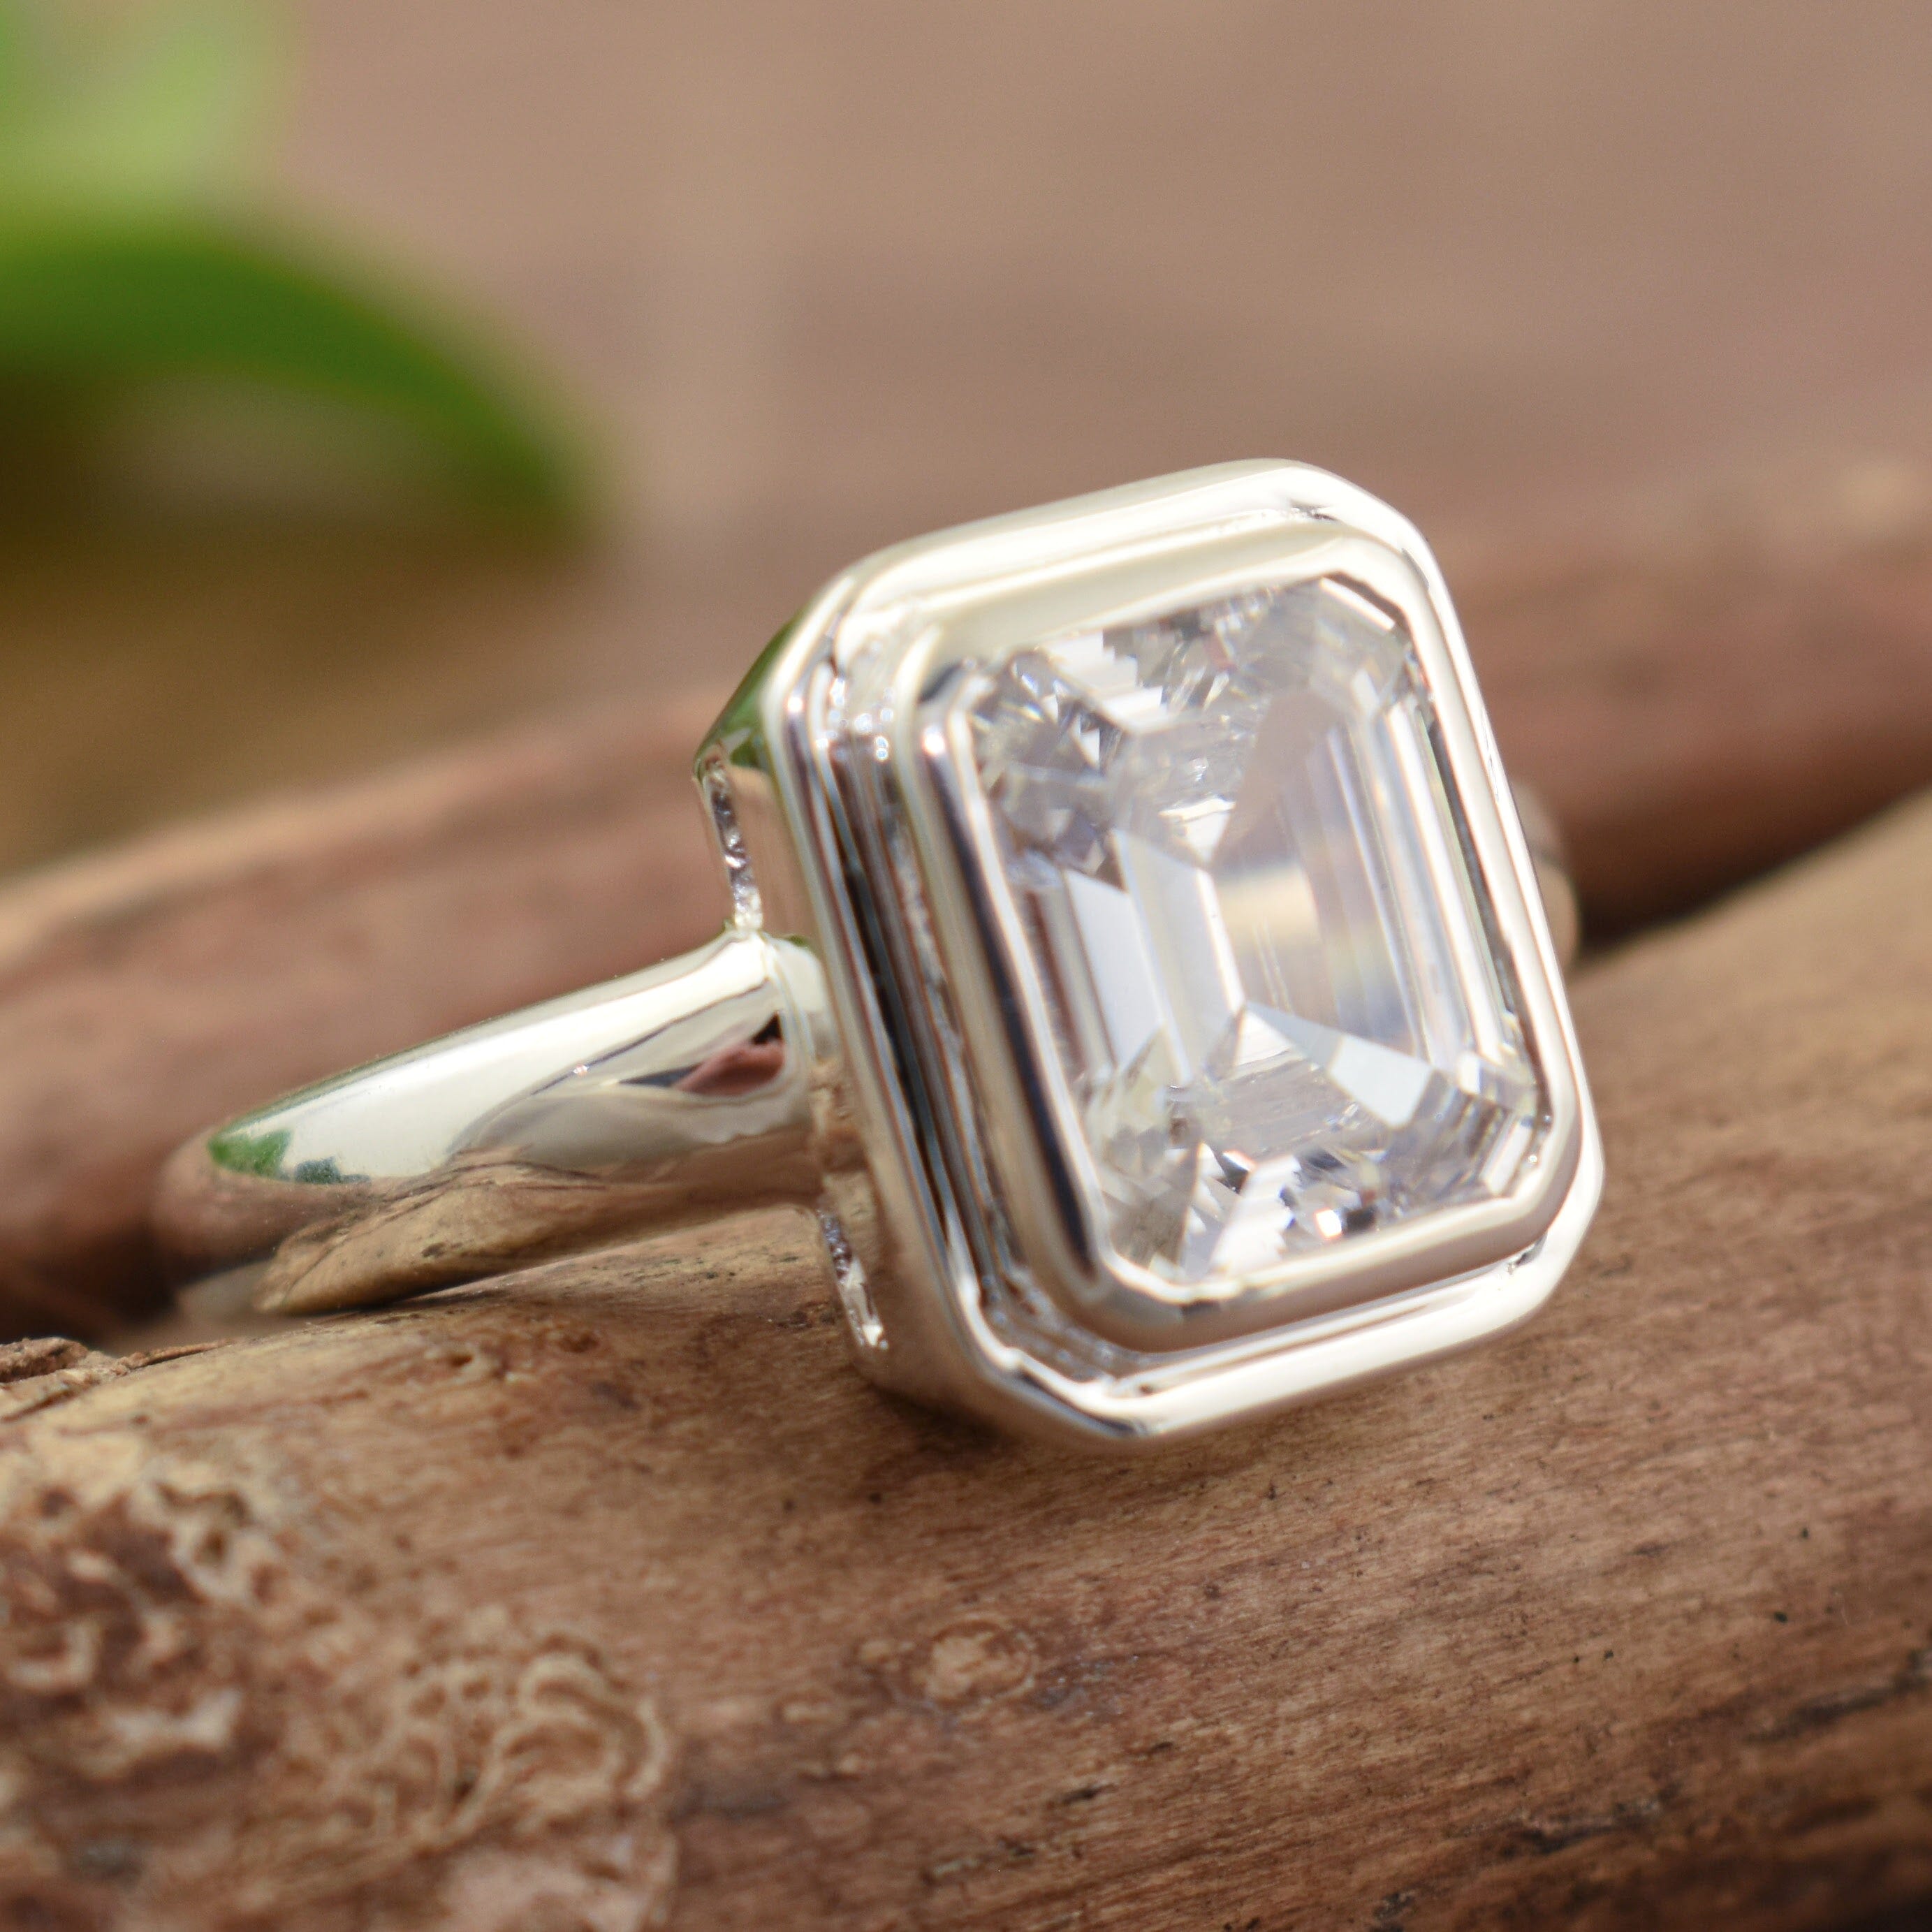 Handcrafted sterling silver ring with emerald cut cubic zirconia